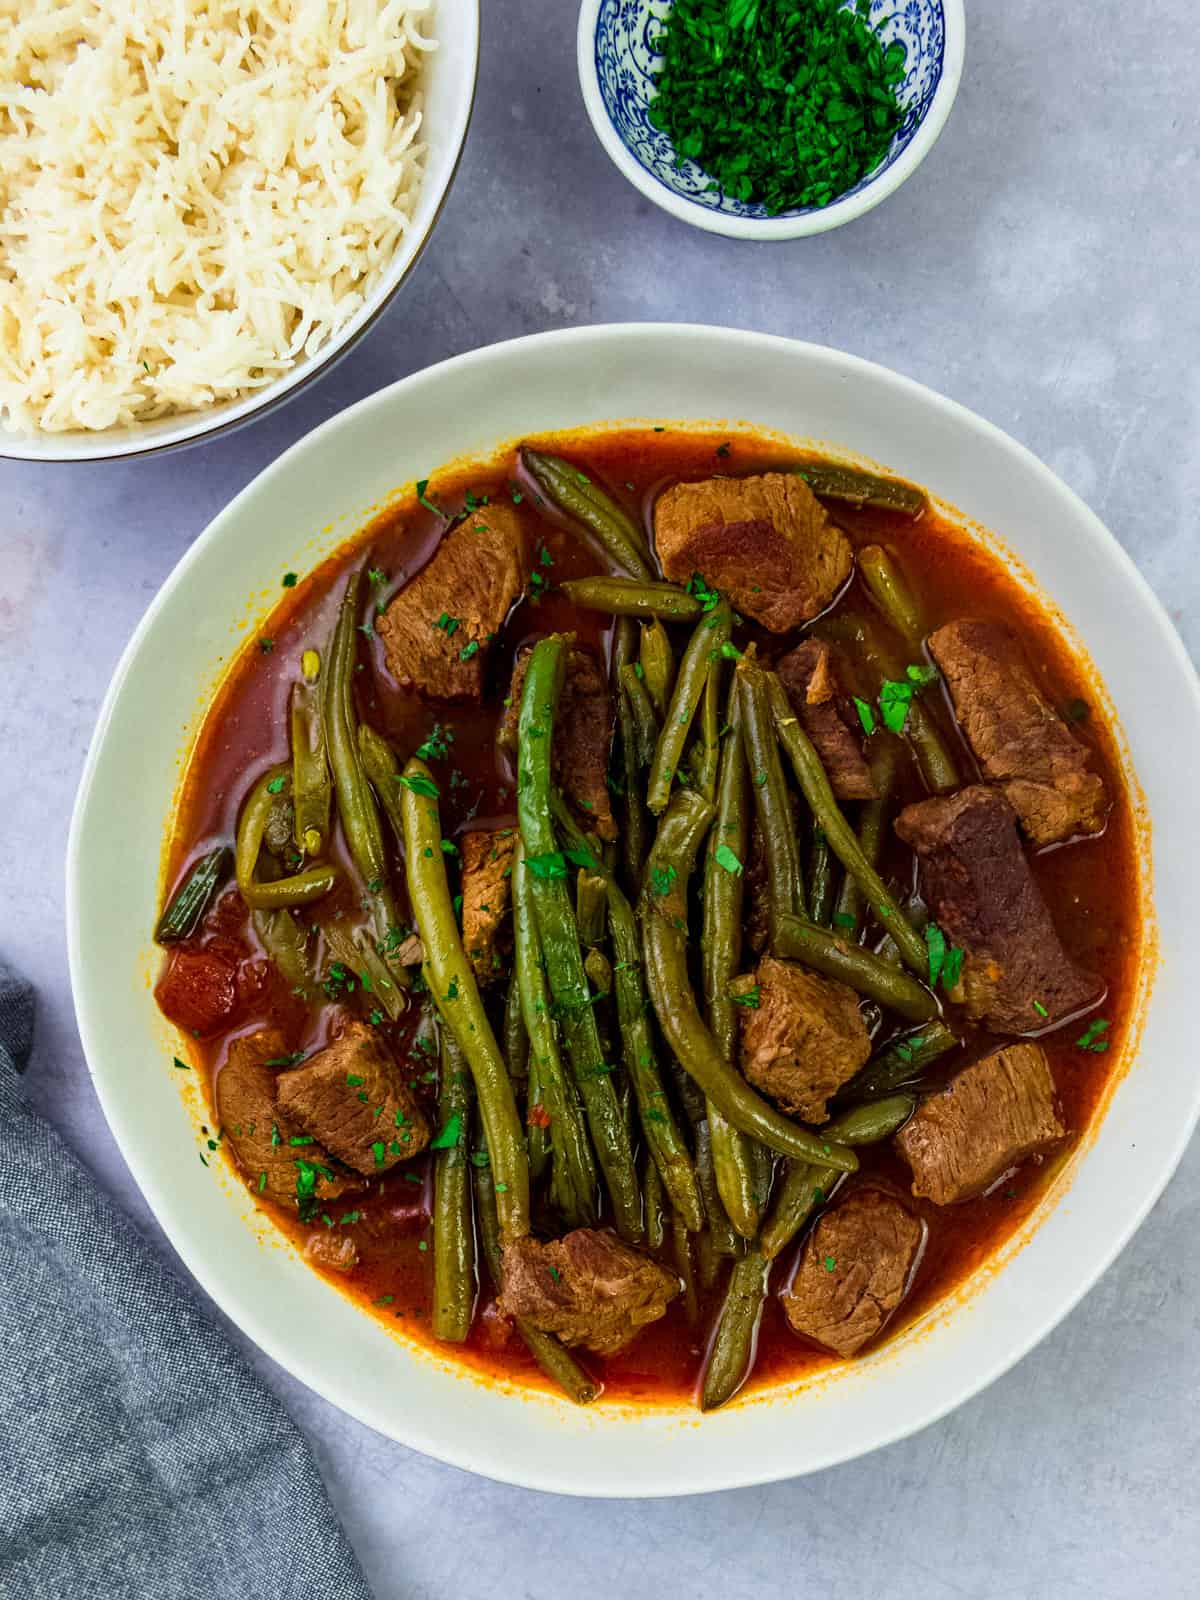 Serve fasulye, a Turkish meat and green bean stew with a side of rice to soak up the delicious tomato broth.